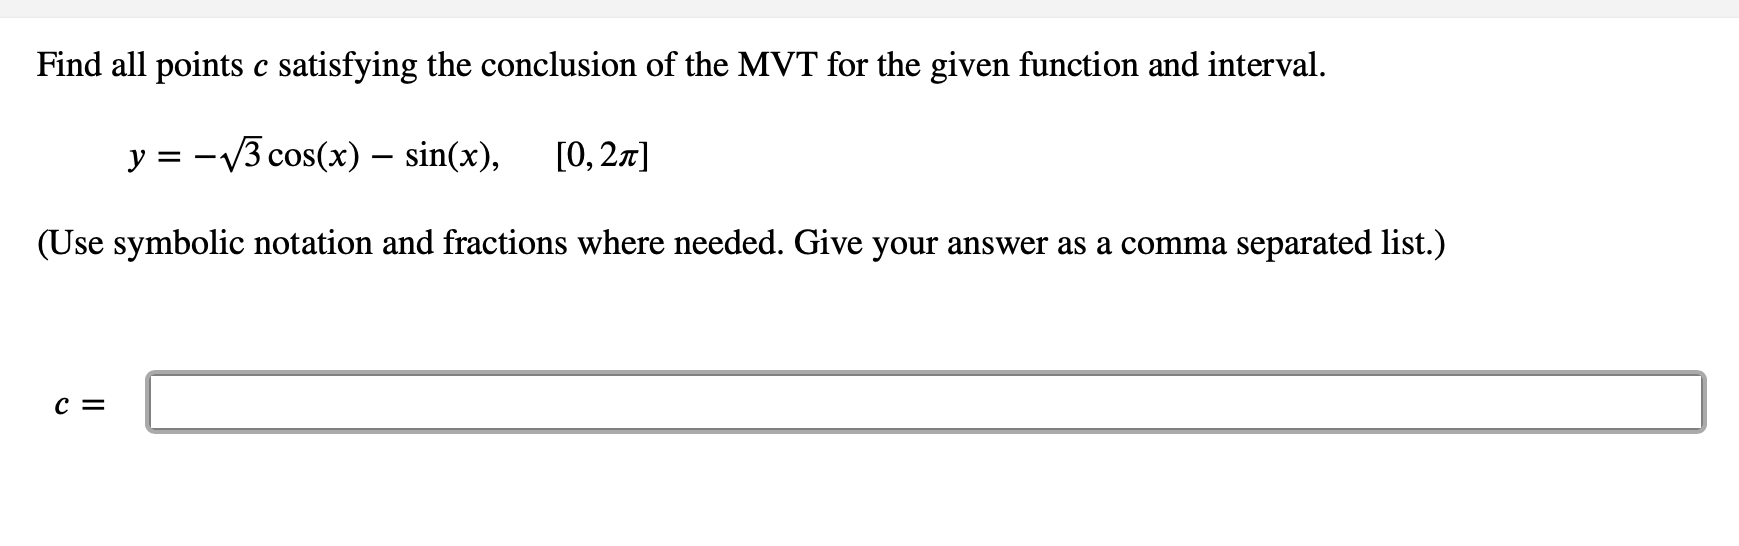 Find all points c satisfying the conclusion of the MVT for the given function and interval.
y = -/3 cos(x) – sin(x),
[0, 27]
(Use symbolic notation and fractions where needed. Give your answer as a comma separated list.)
c =
